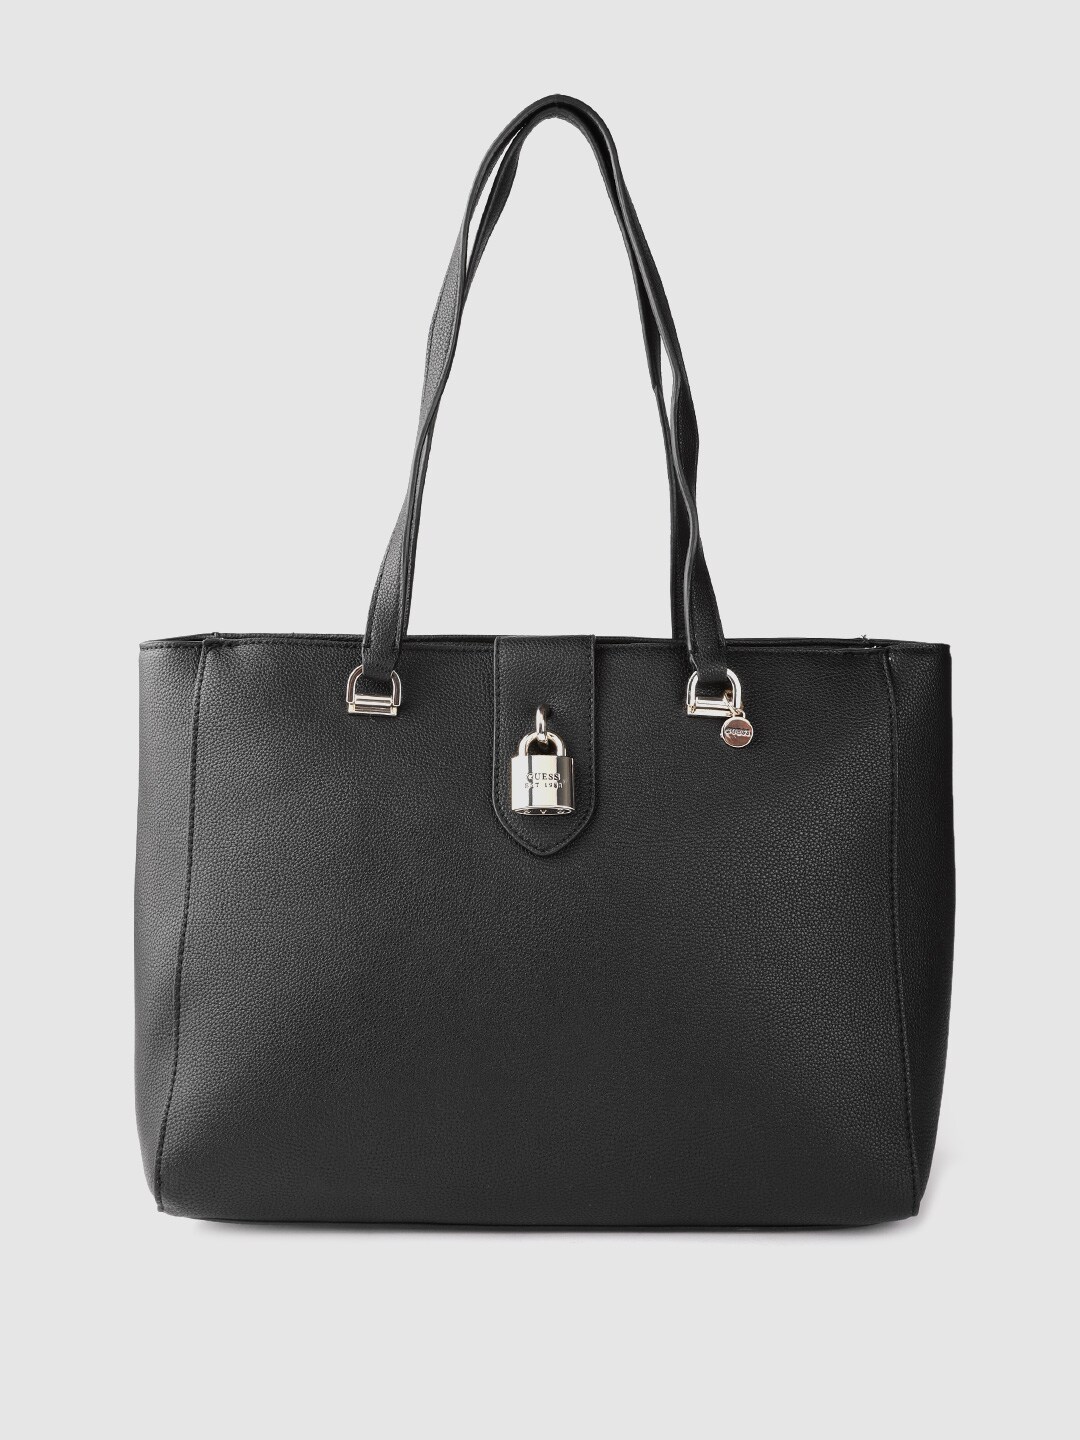 GUESS Women Black Solid Structured Shoulder Bag Price in India